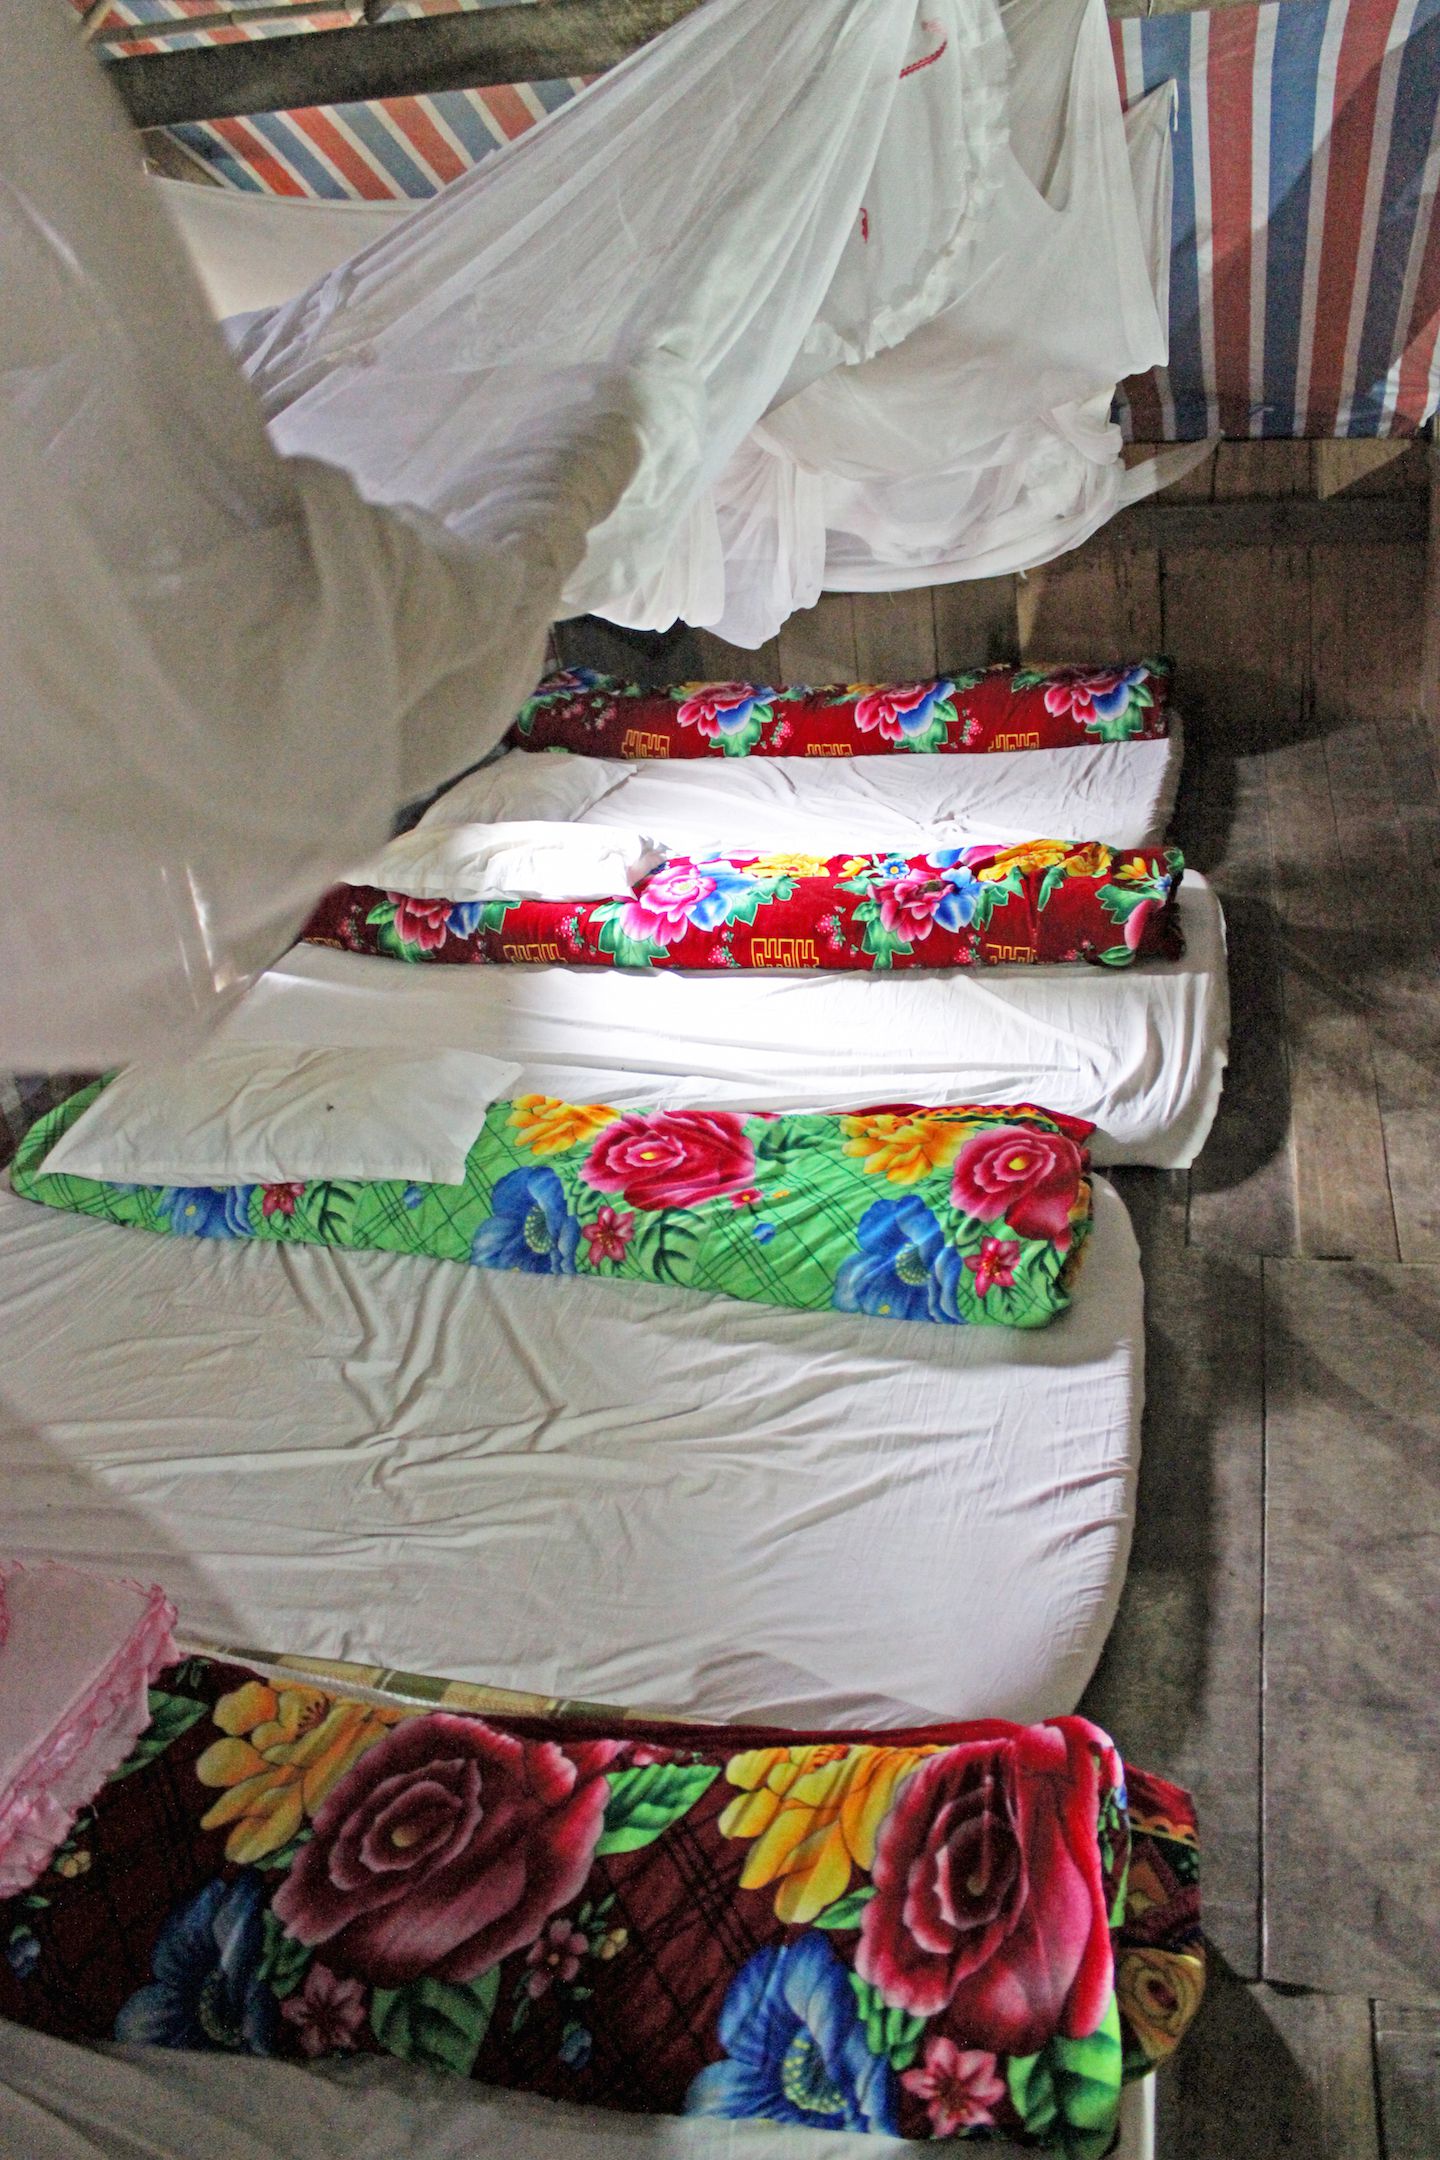 Our bed at the homestay